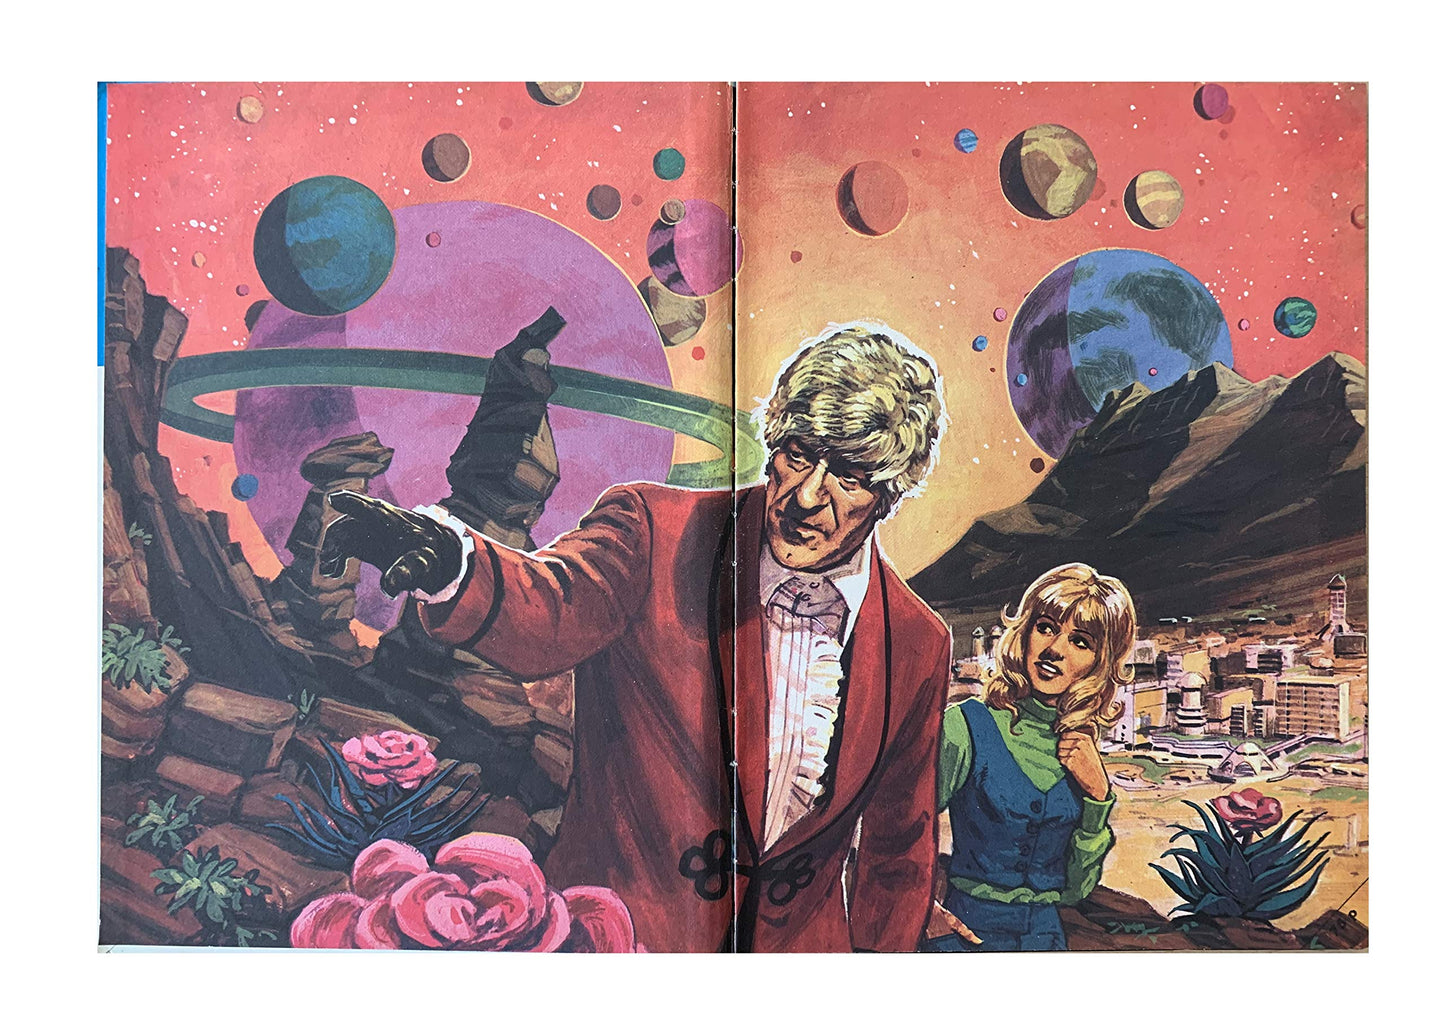 Vintage The Dr Who Annual 1974 Starring Jon Pertwee